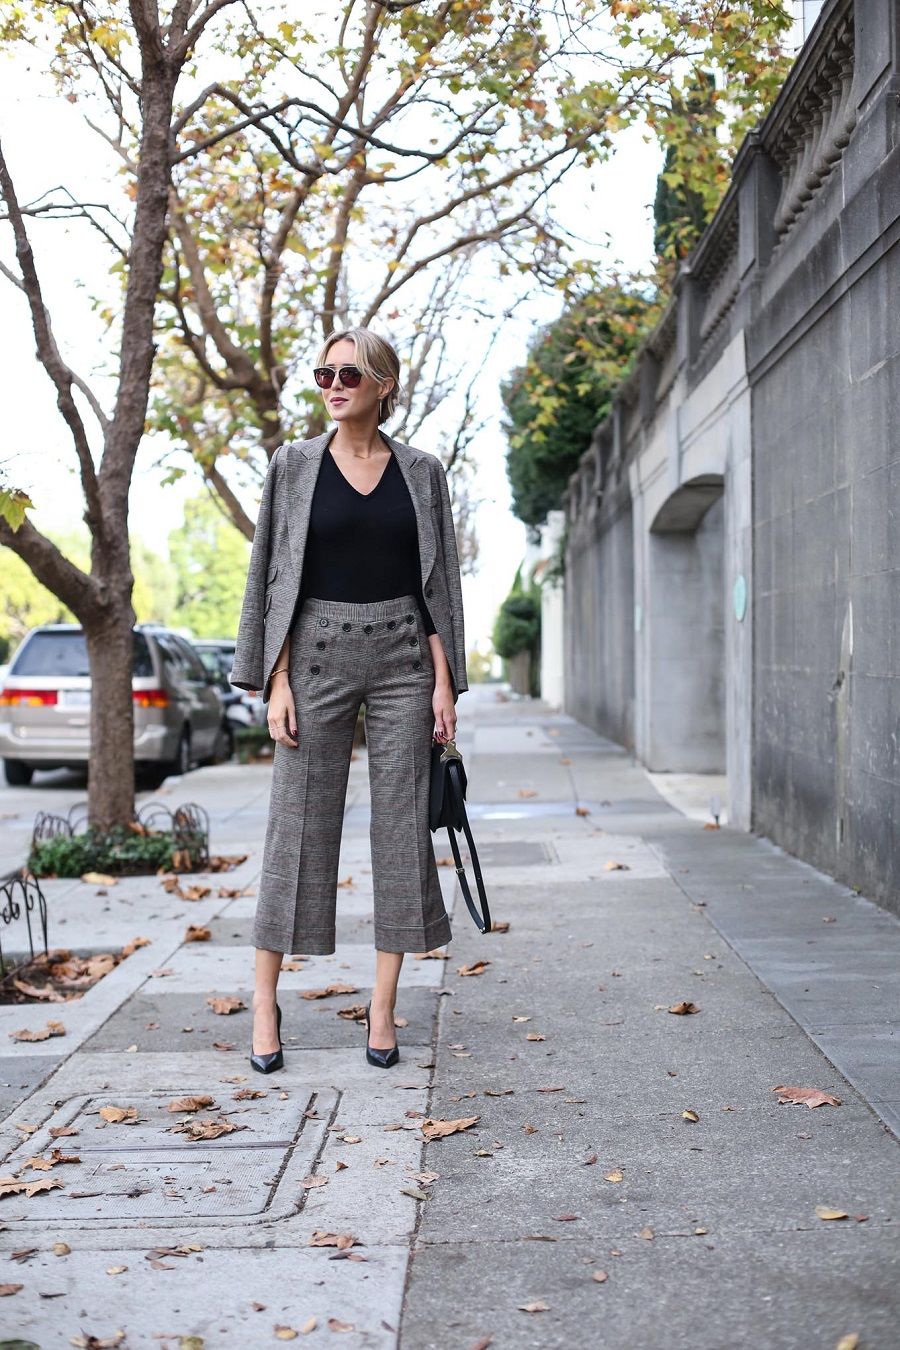 olivia-palermo-chelsea28-nordstrom-glen-plaid-sailor-button-culottes-and-peplum-suit-jacket-fall-winter-workwear-trends2-680x10202x-copy-20efdbcdb896ebe7a249463e98069081.jpg